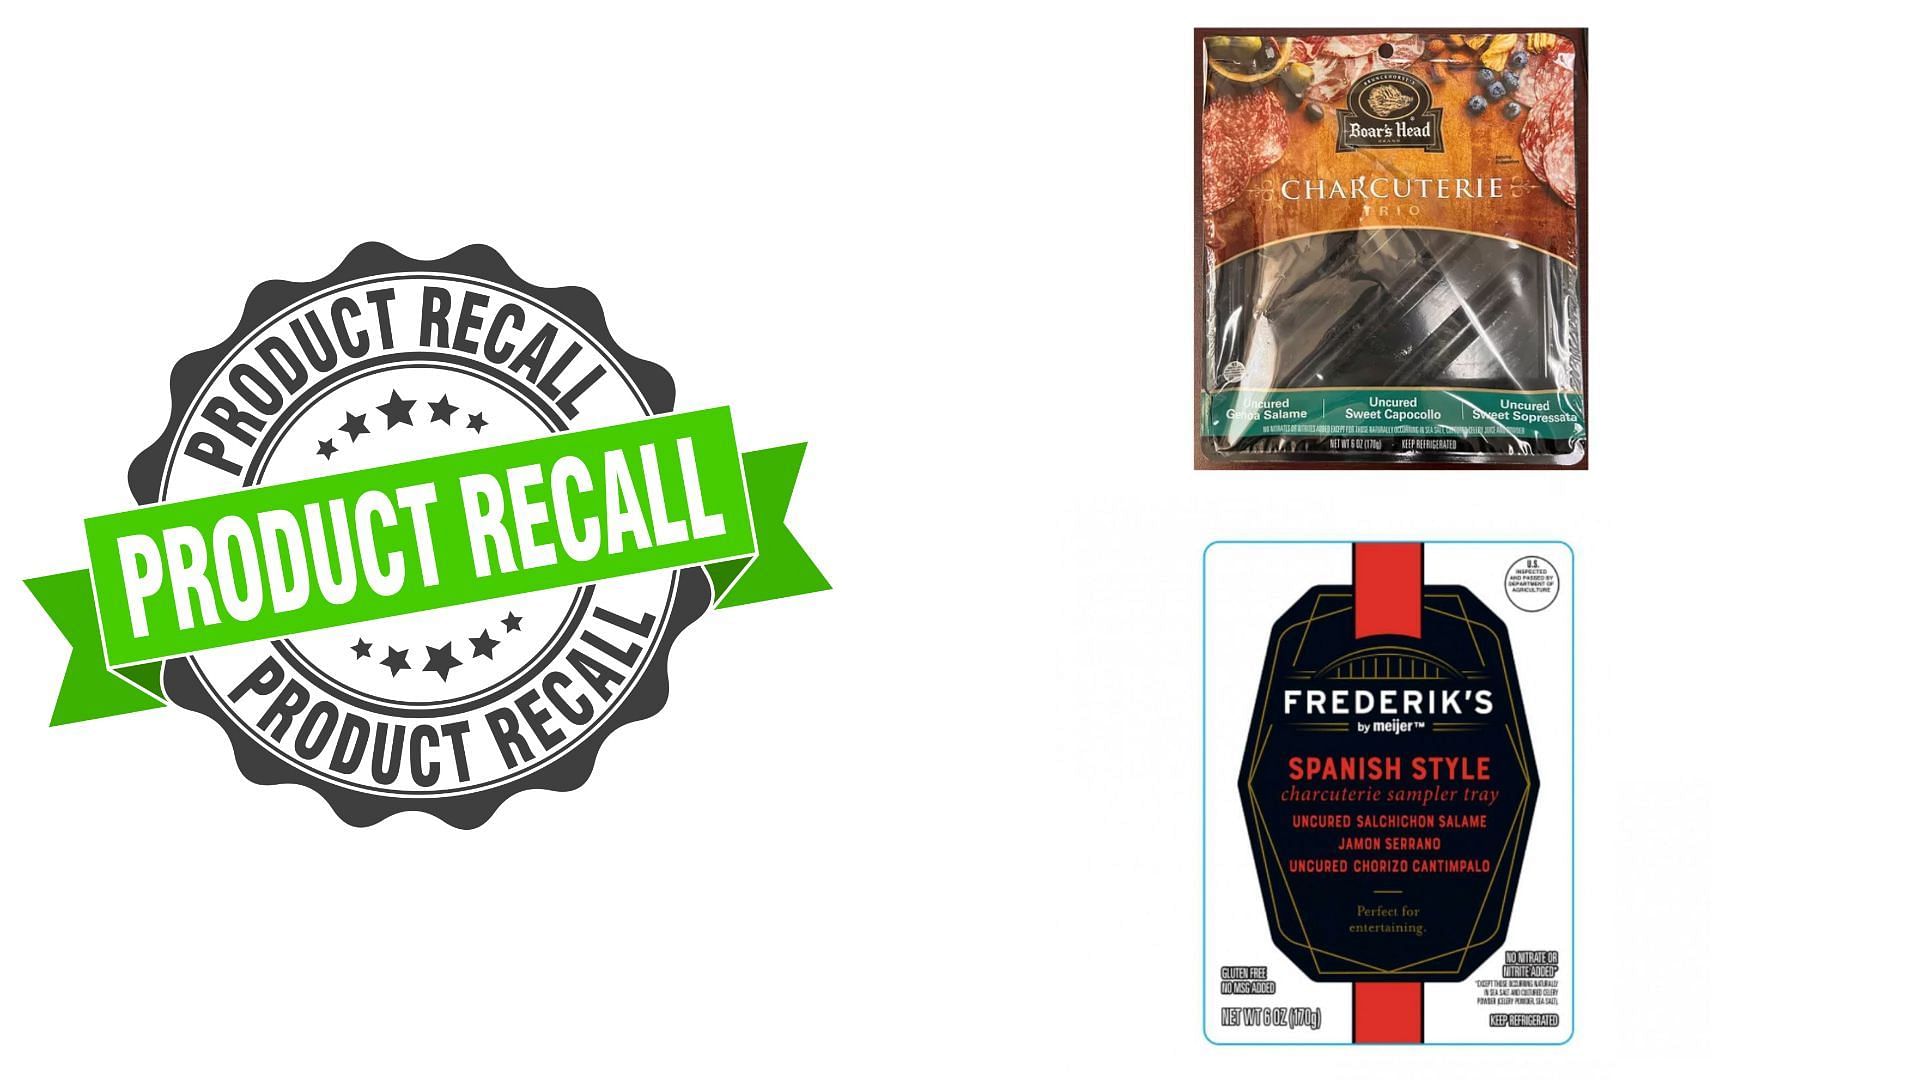 Charcuterie sausage and salami recall List of products and more amid